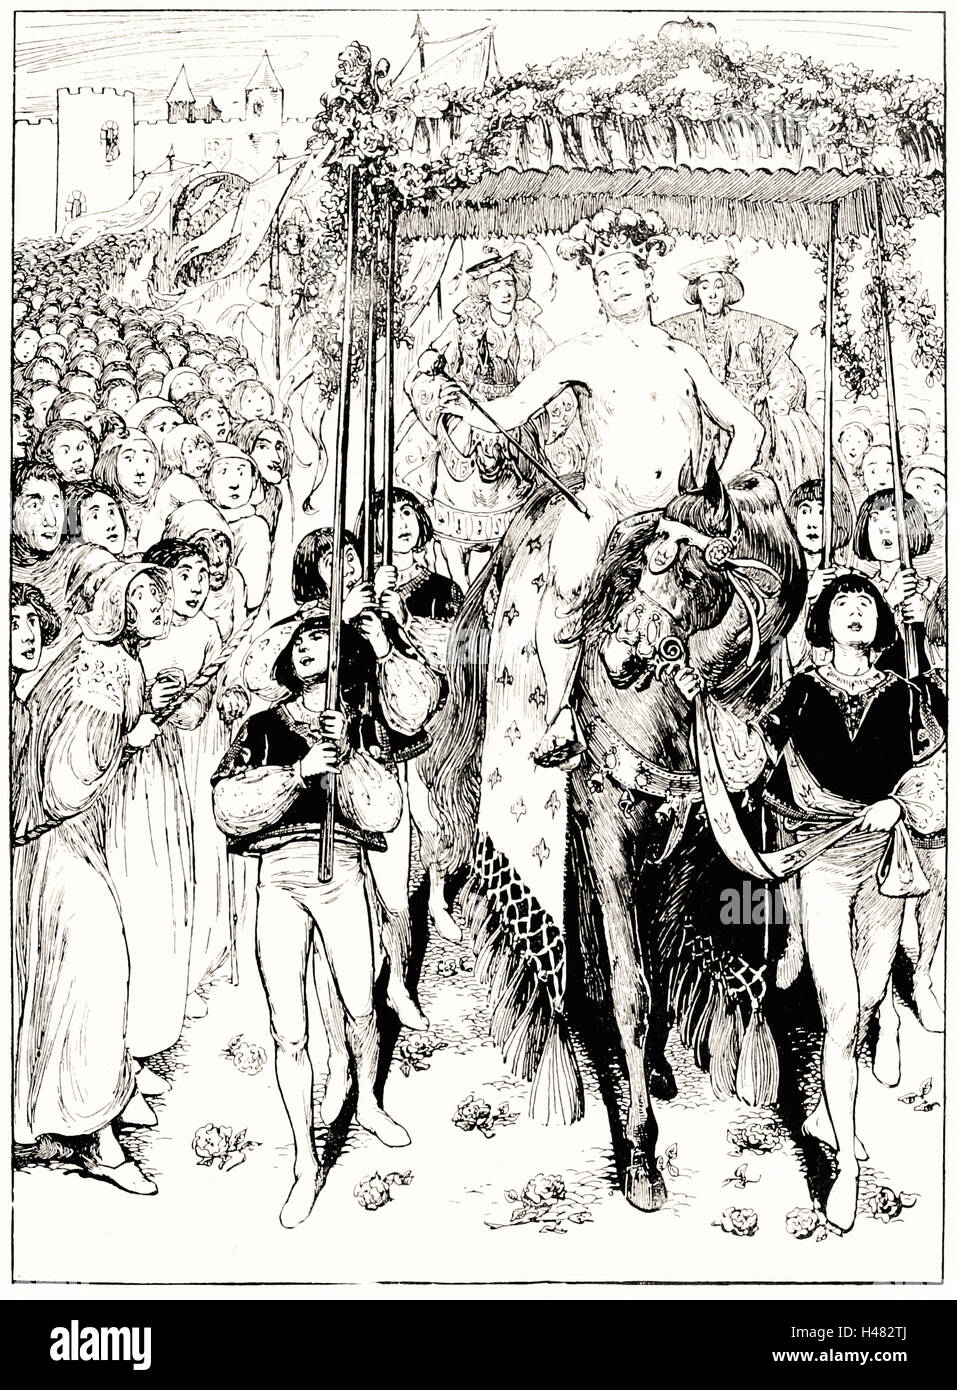 Helen Stratton - Page 45 illustration in fairy tales of Andersen Stock Photo